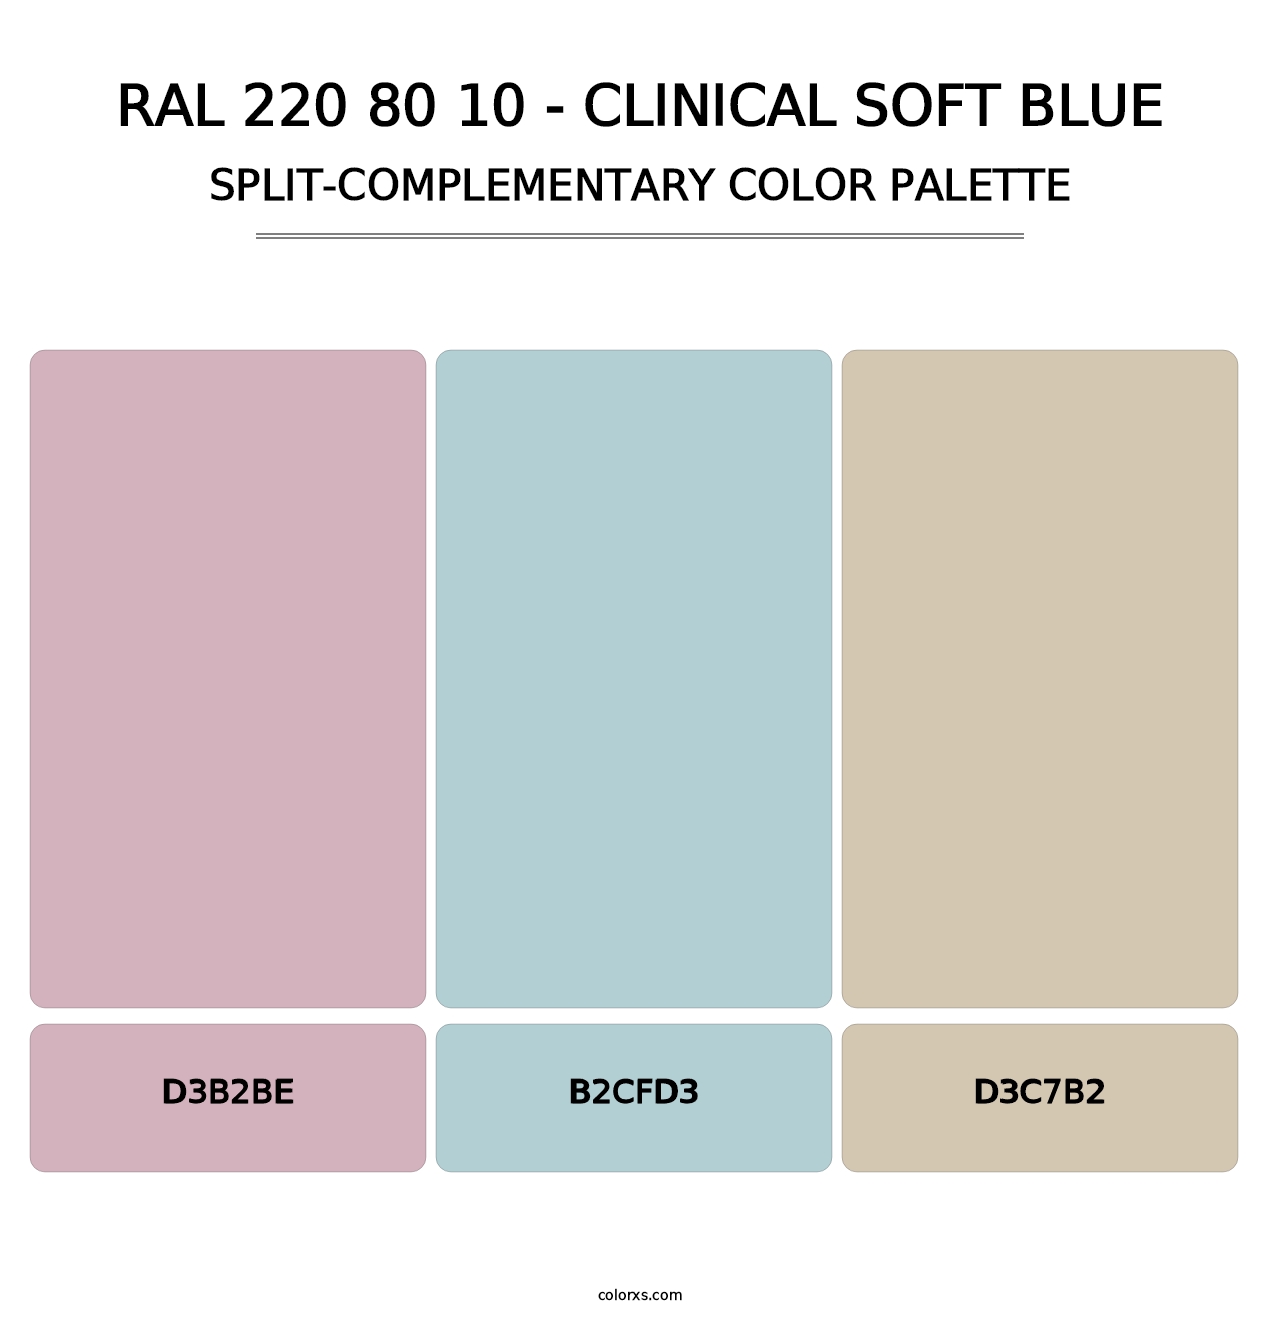 RAL 220 80 10 - Clinical Soft Blue - Split-Complementary Color Palette